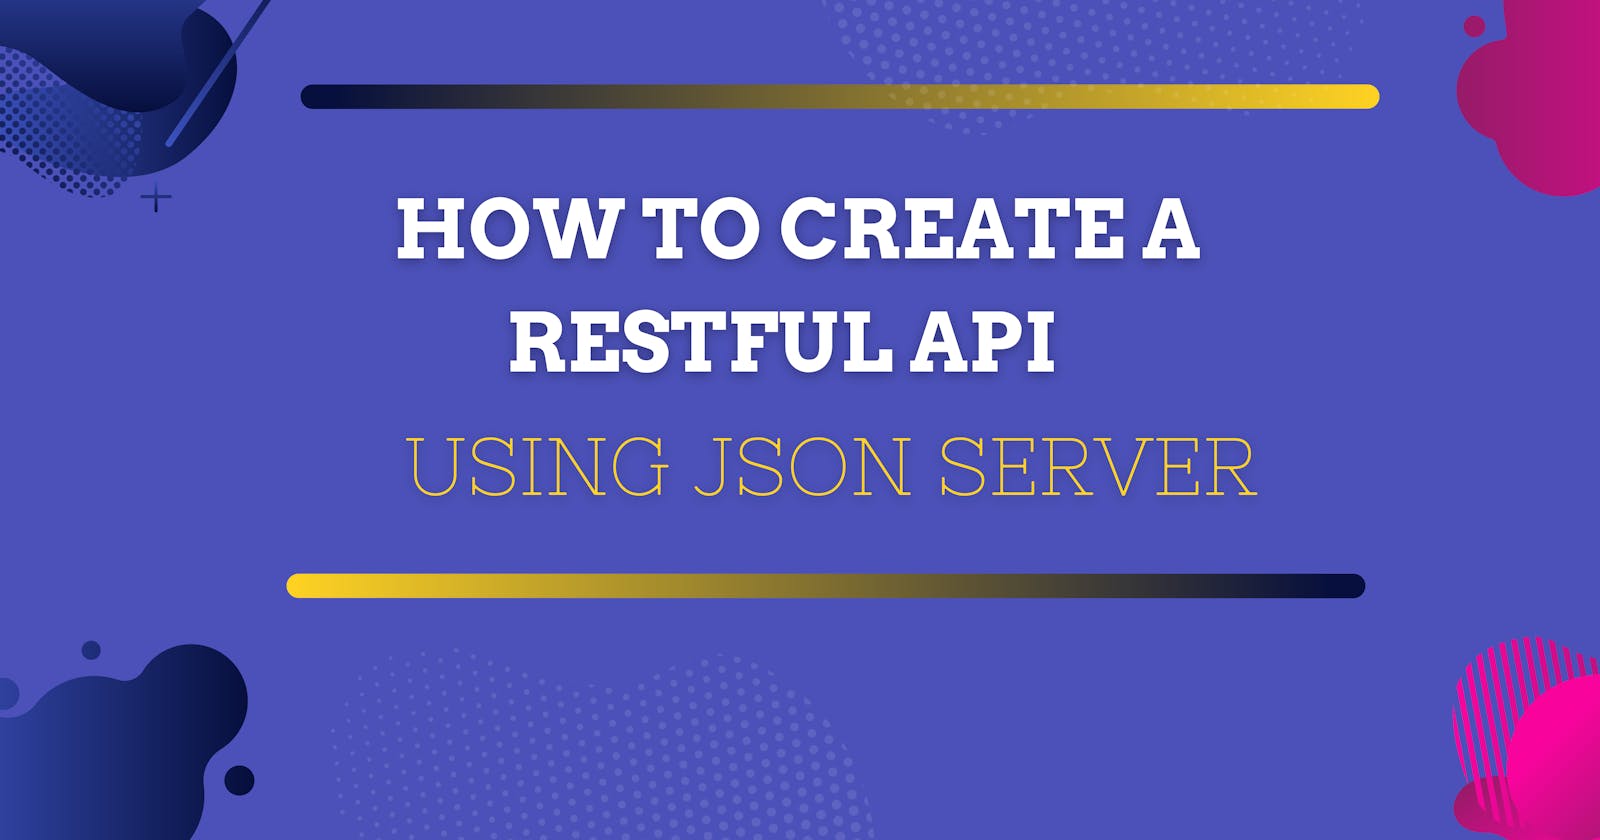 How to Create a RESTful API using JSON server